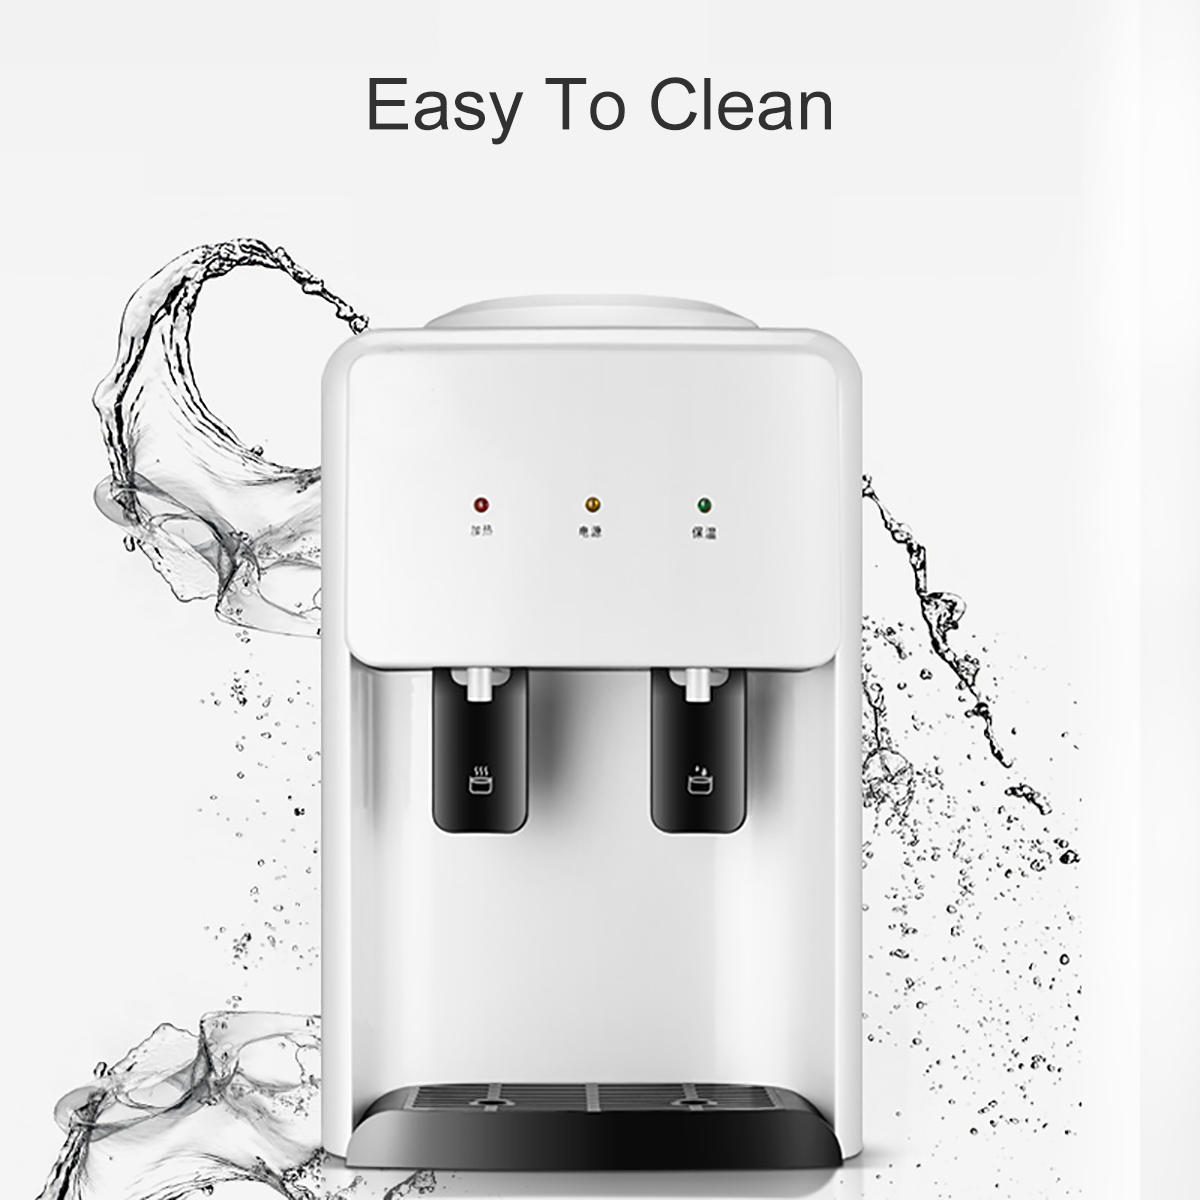 Desktop-Mini-WarmHotCold-Water-Dispenser-Pumping-Device-Pushing-Switch-Convenient-Getting-Water-Home-1611038